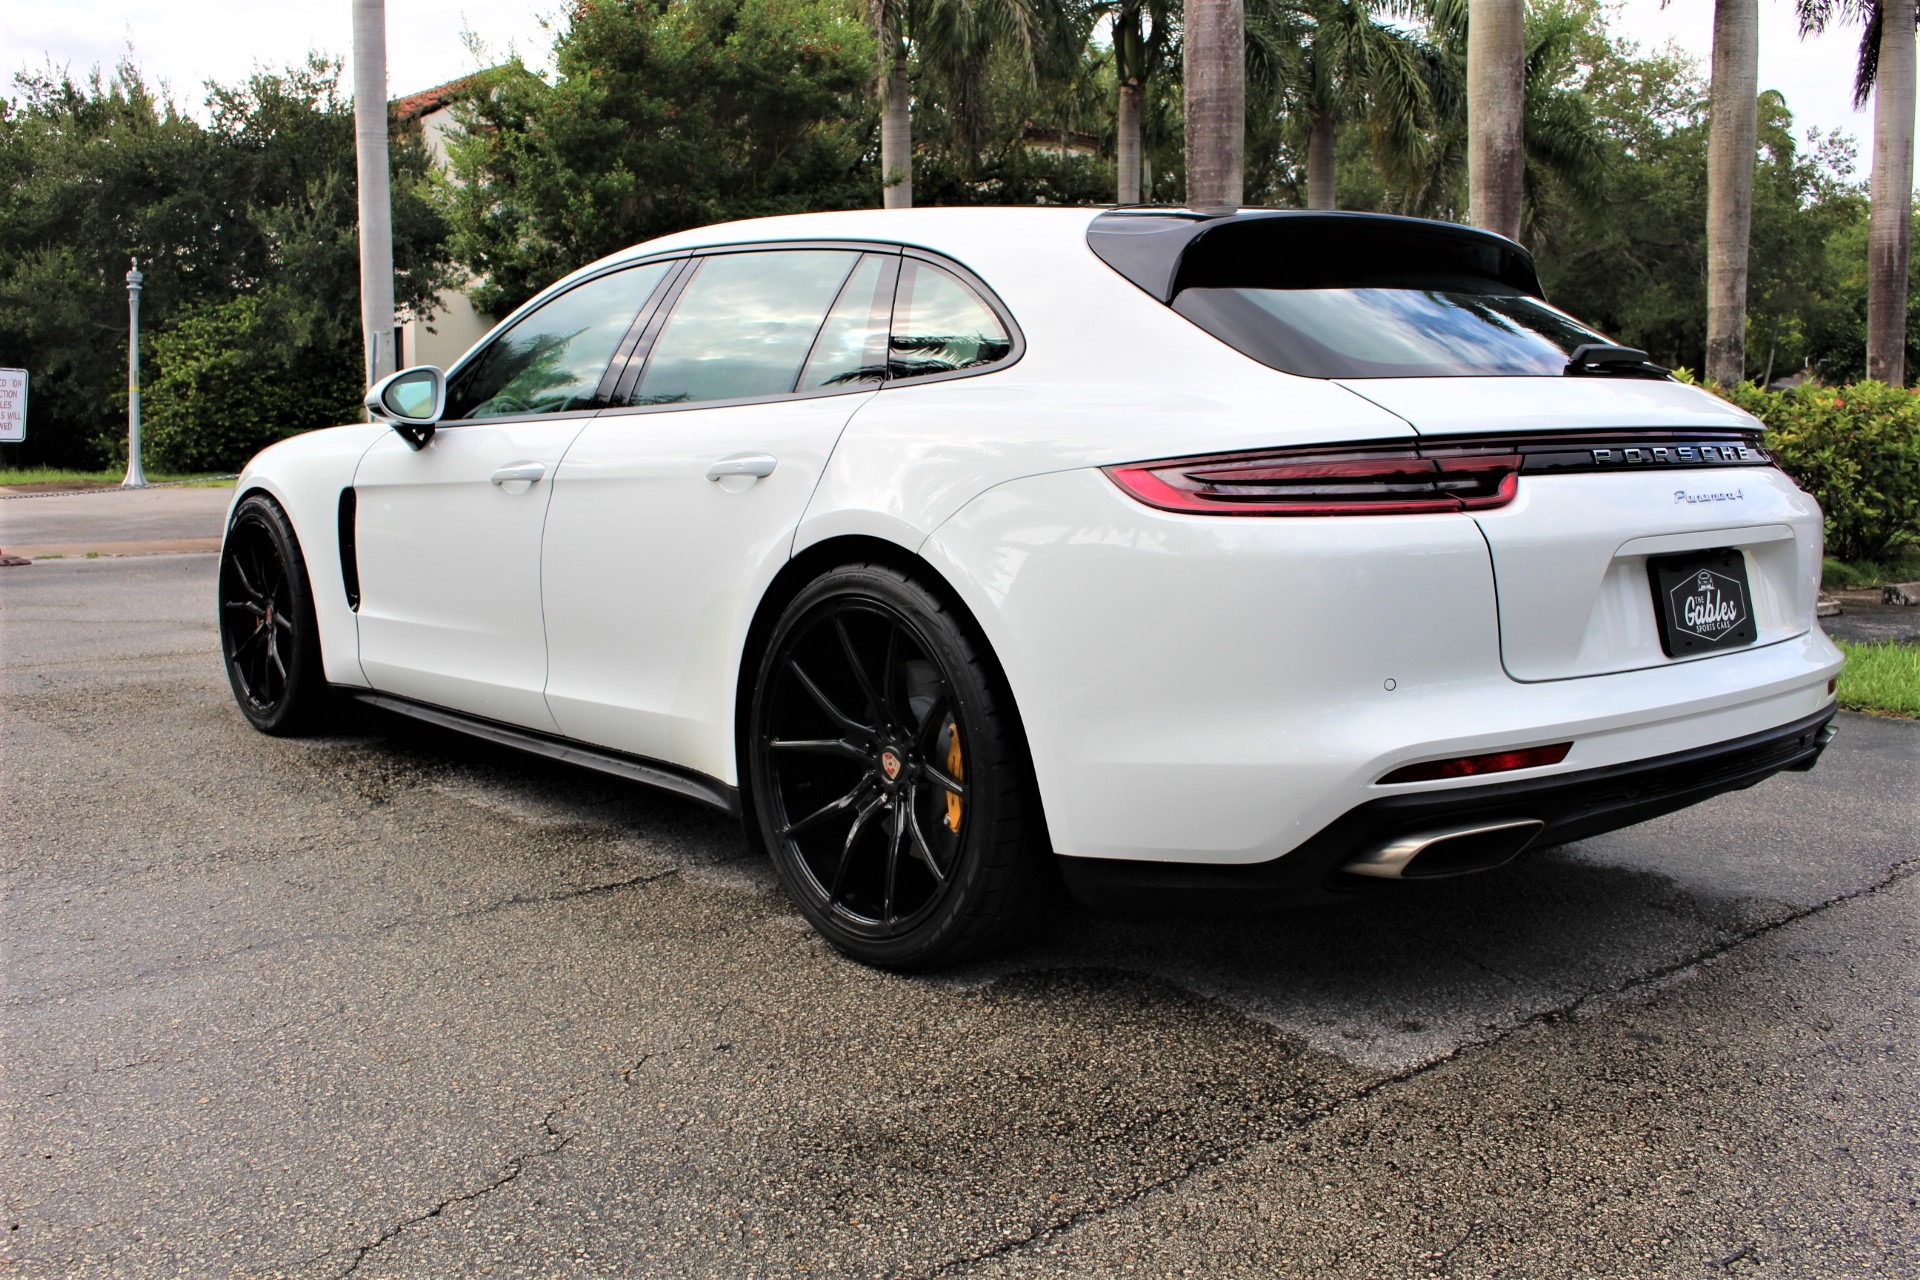 Used 2018 Porsche Panamera 4 Sport Turismo for sale Sold at The Gables Sports Cars in Miami FL 33146 2